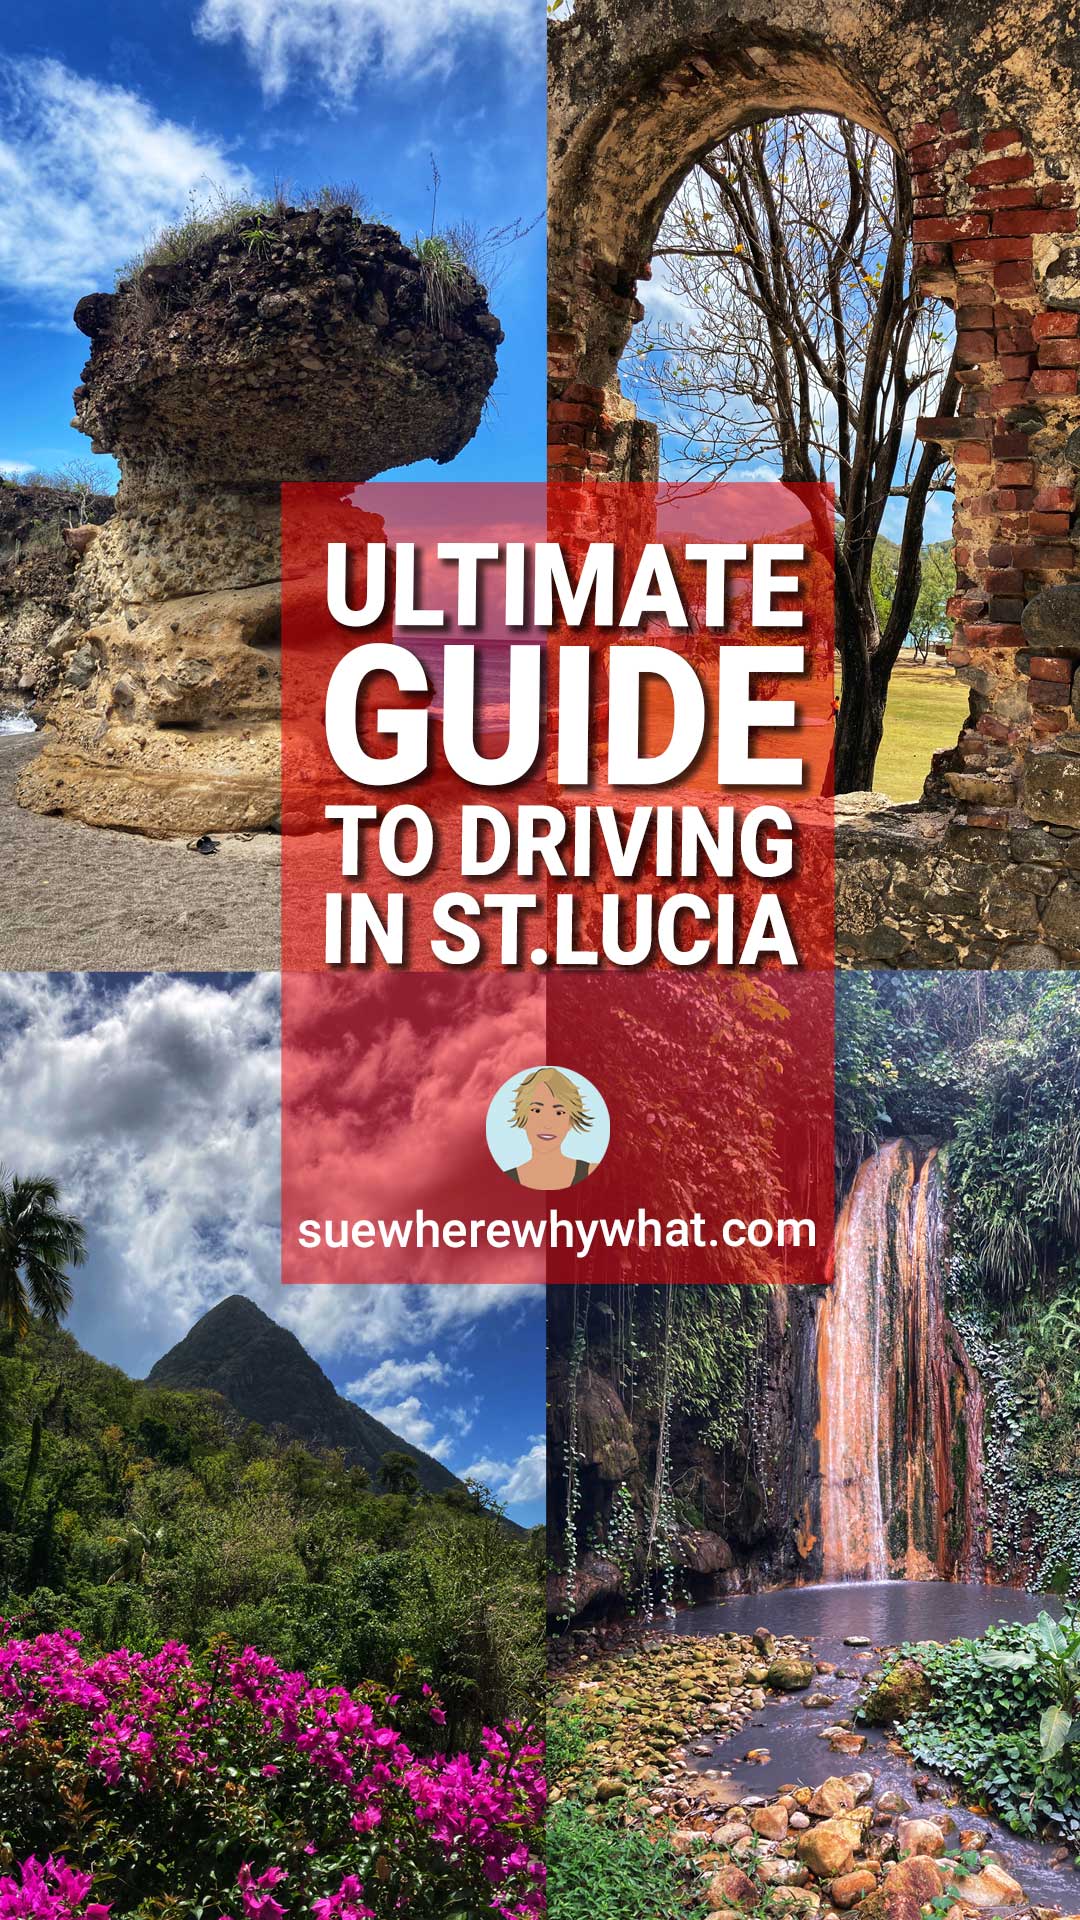 Top Tips for Driving in St Lucia